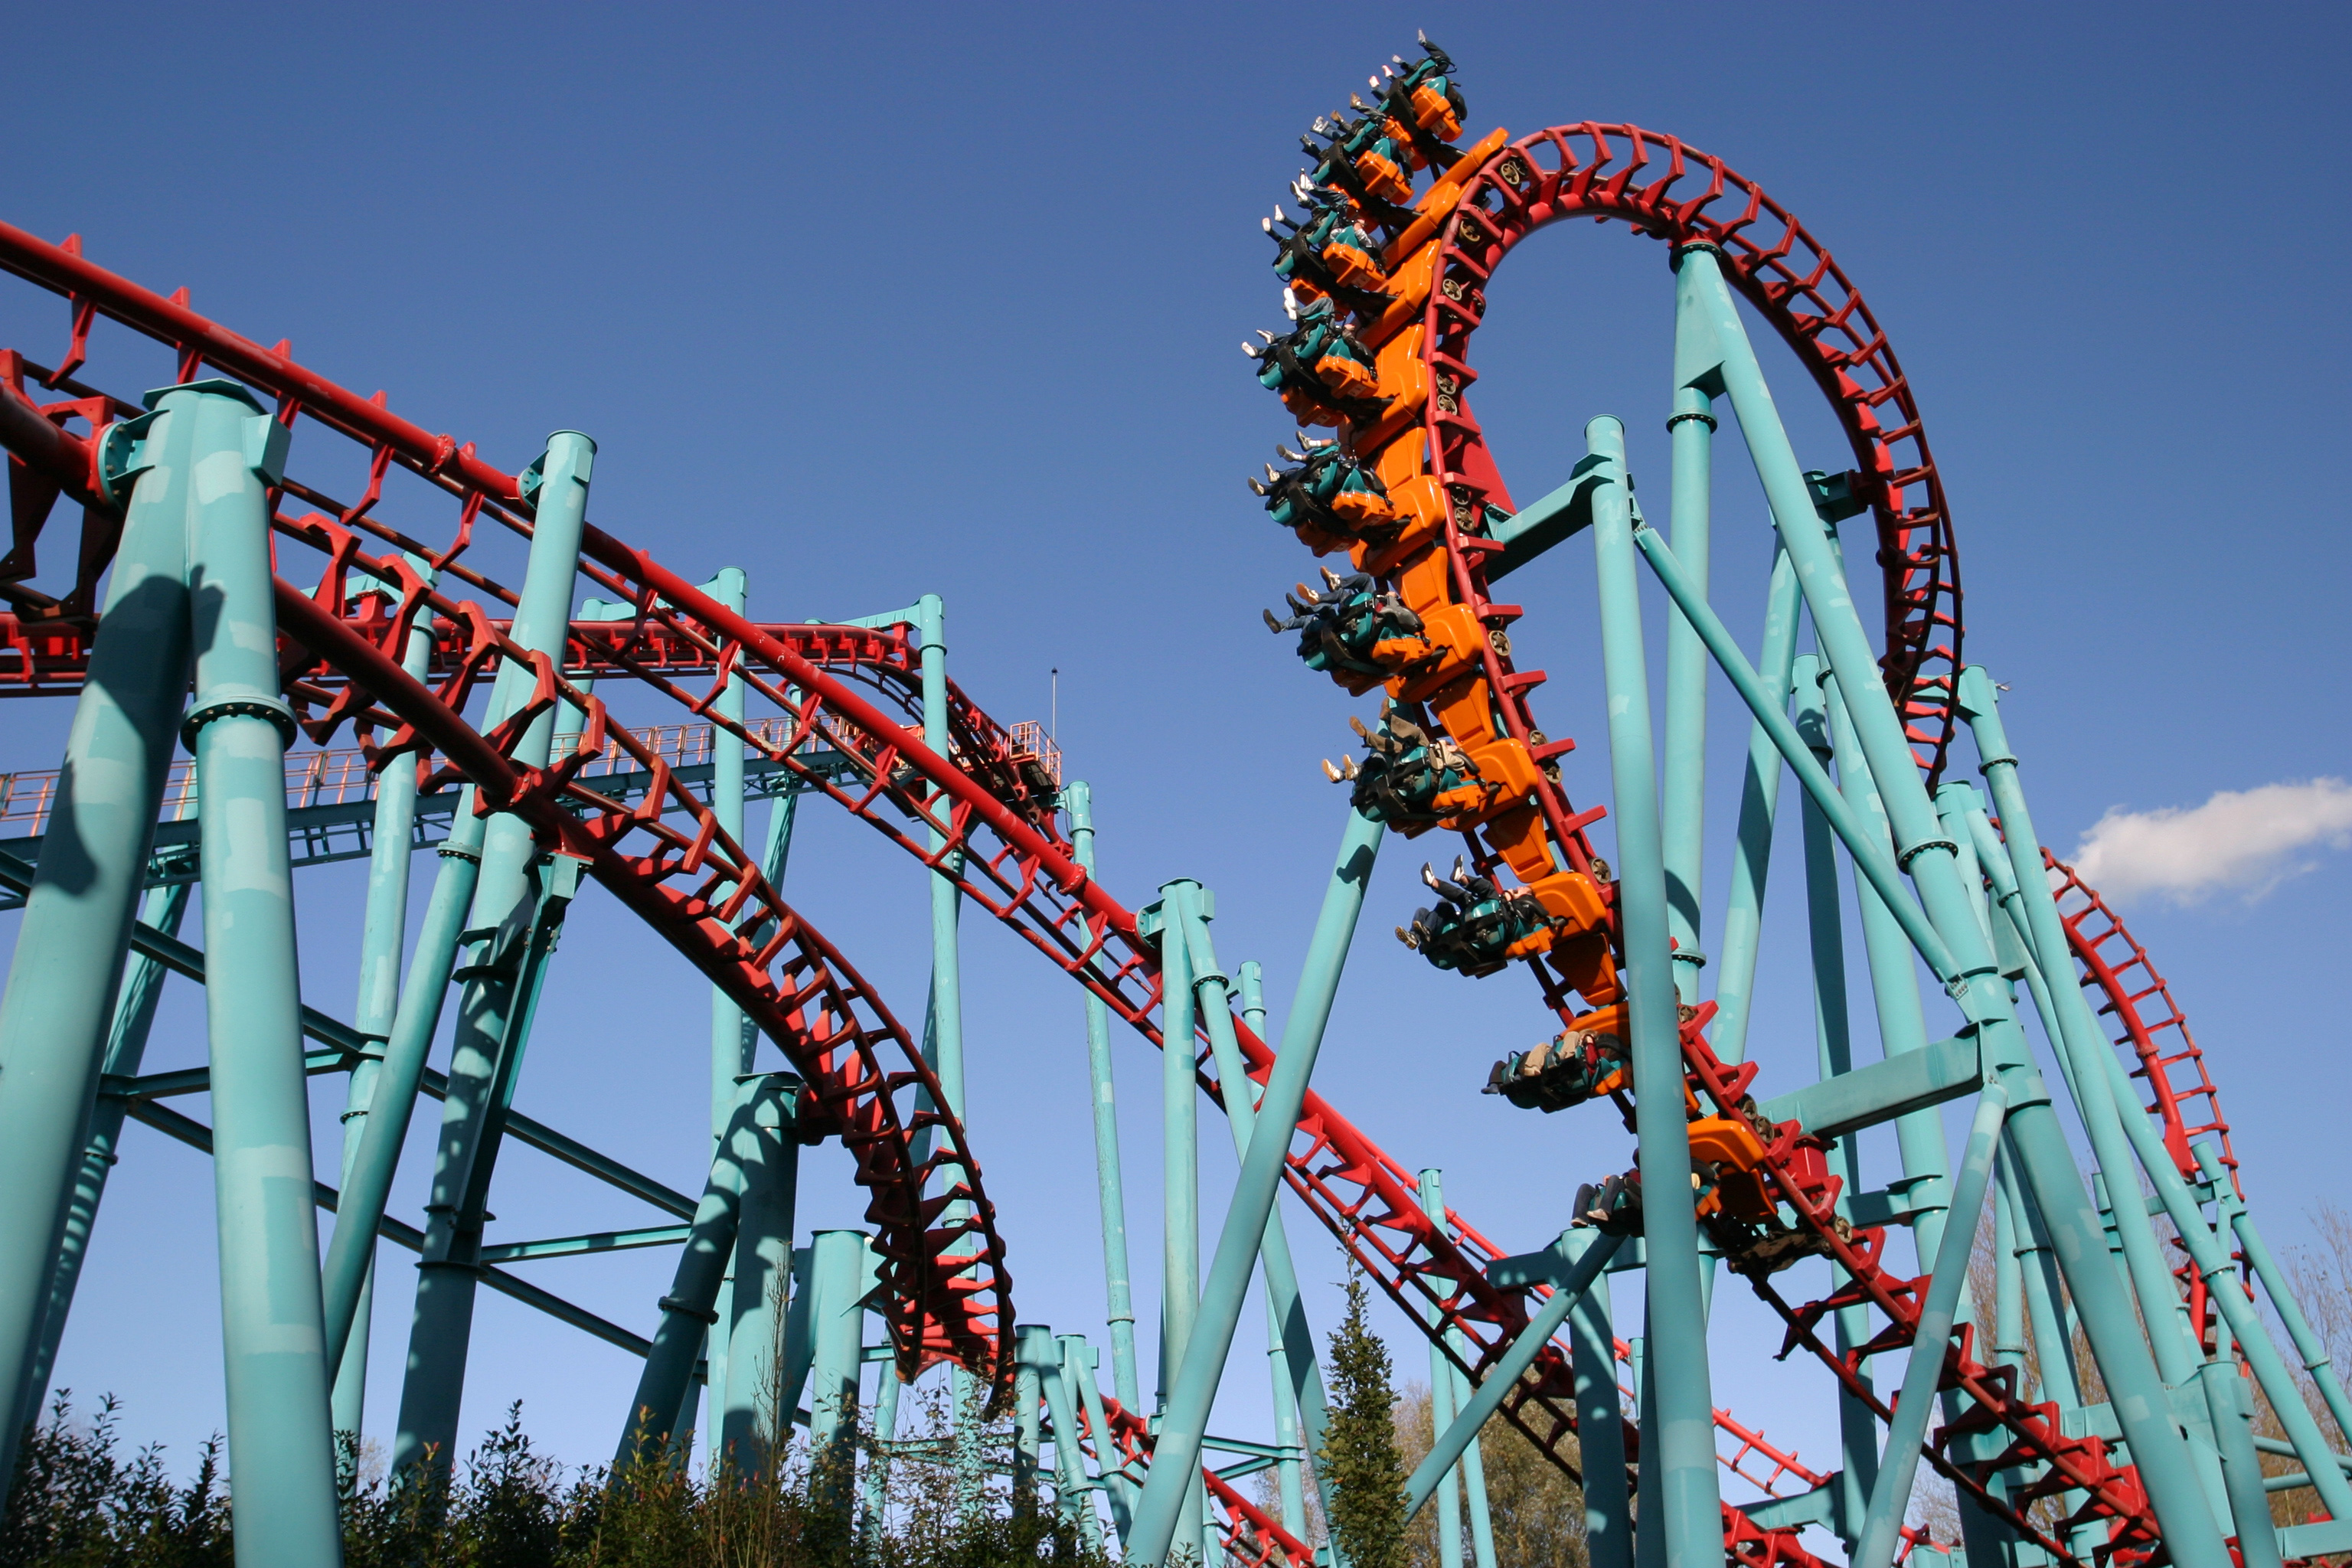 The excitement of launching an innovative new product is similar to the emotions felt when riding a rollercoaster.